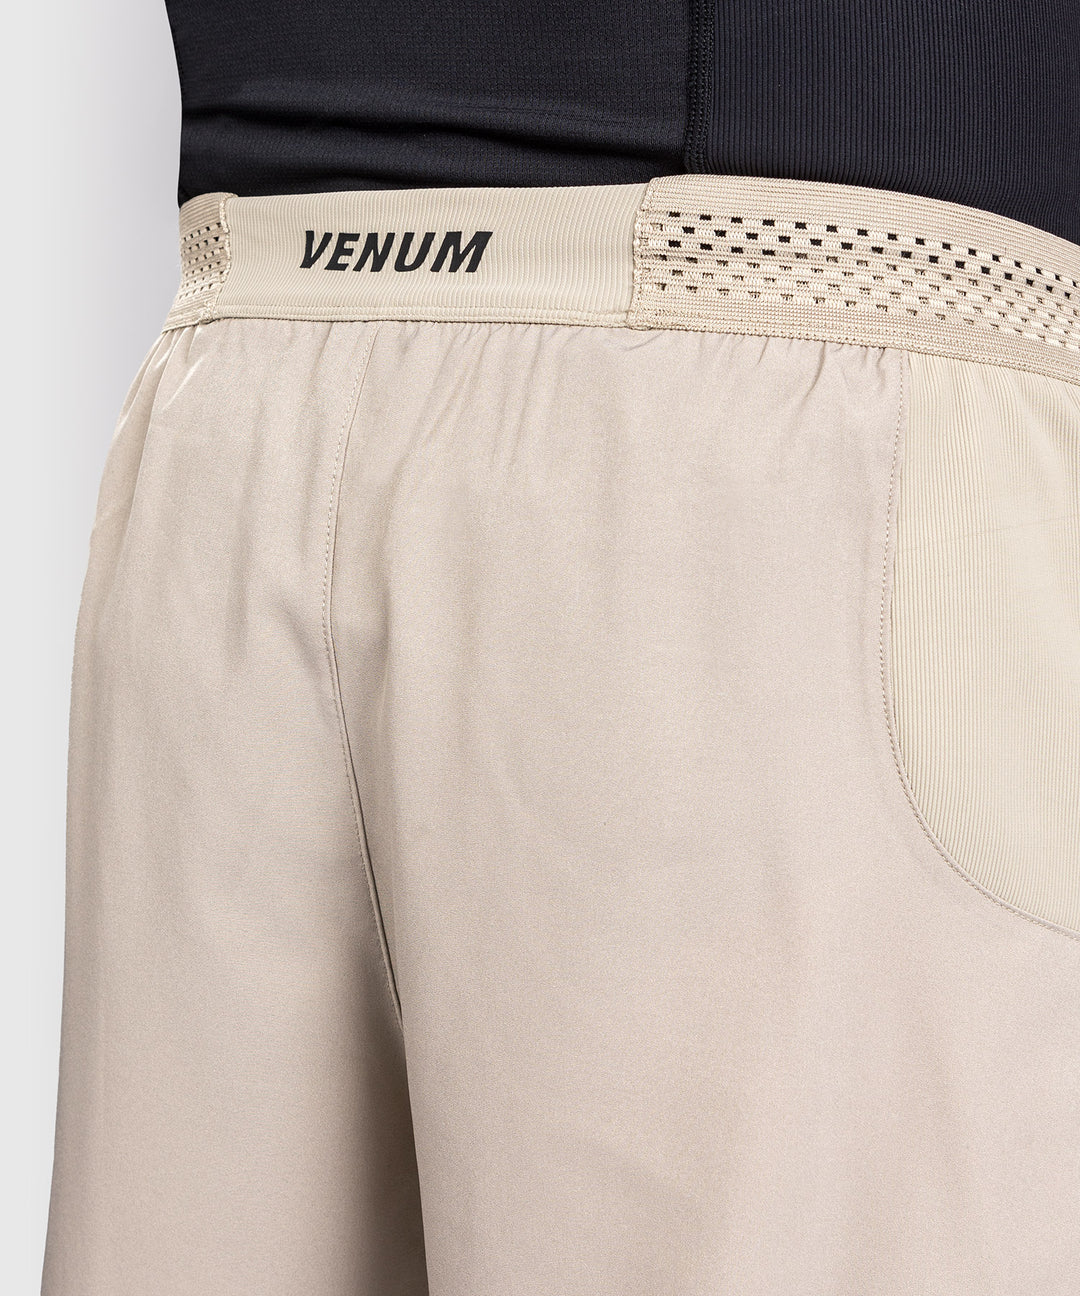 Venum G-Fit Air Training Shorts - Boxing Performance Gear Back View